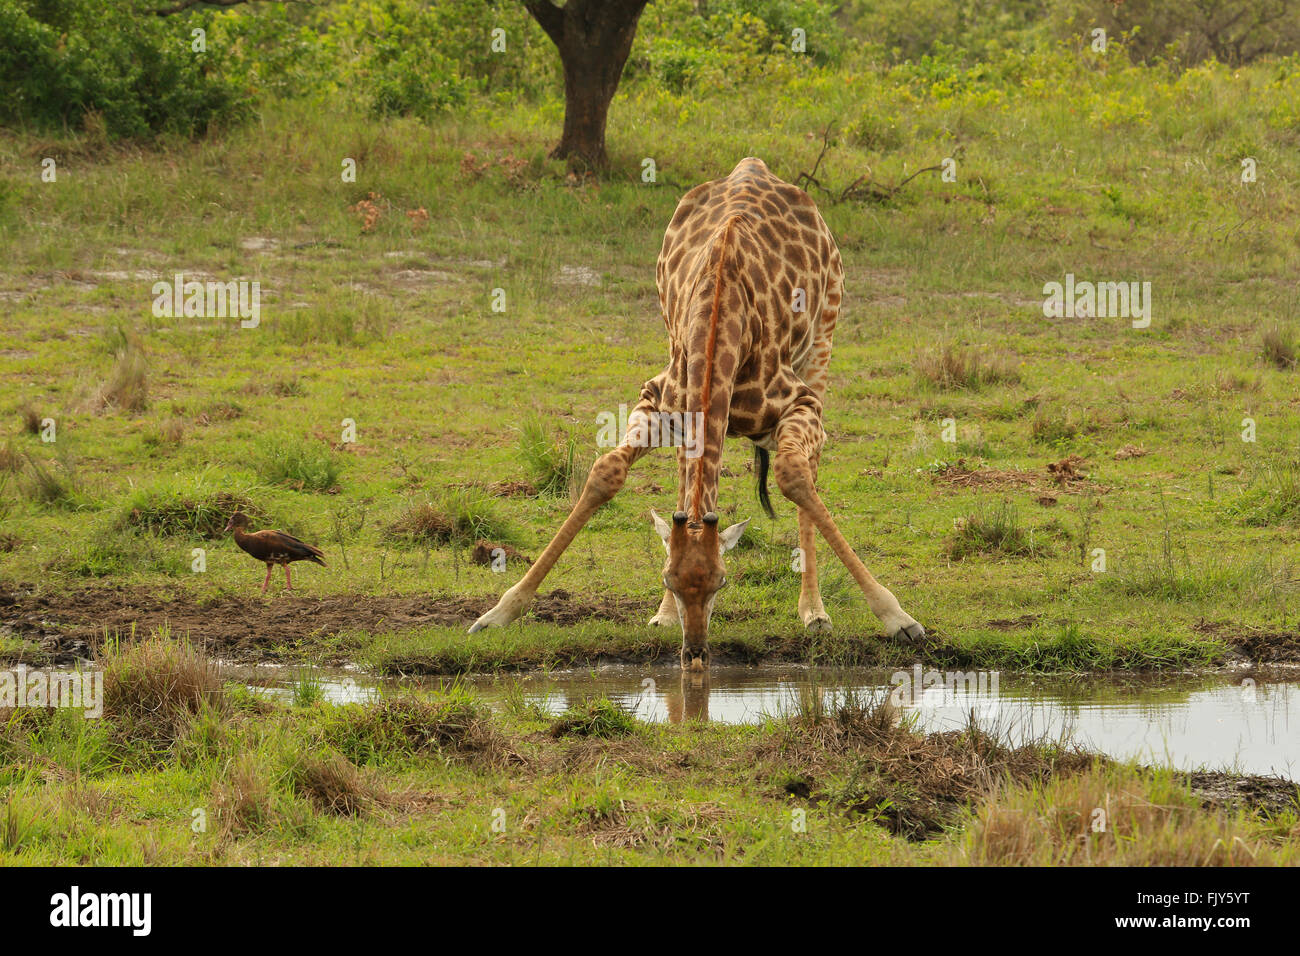 Giraffe at drinking pool South Africa Stock Photo